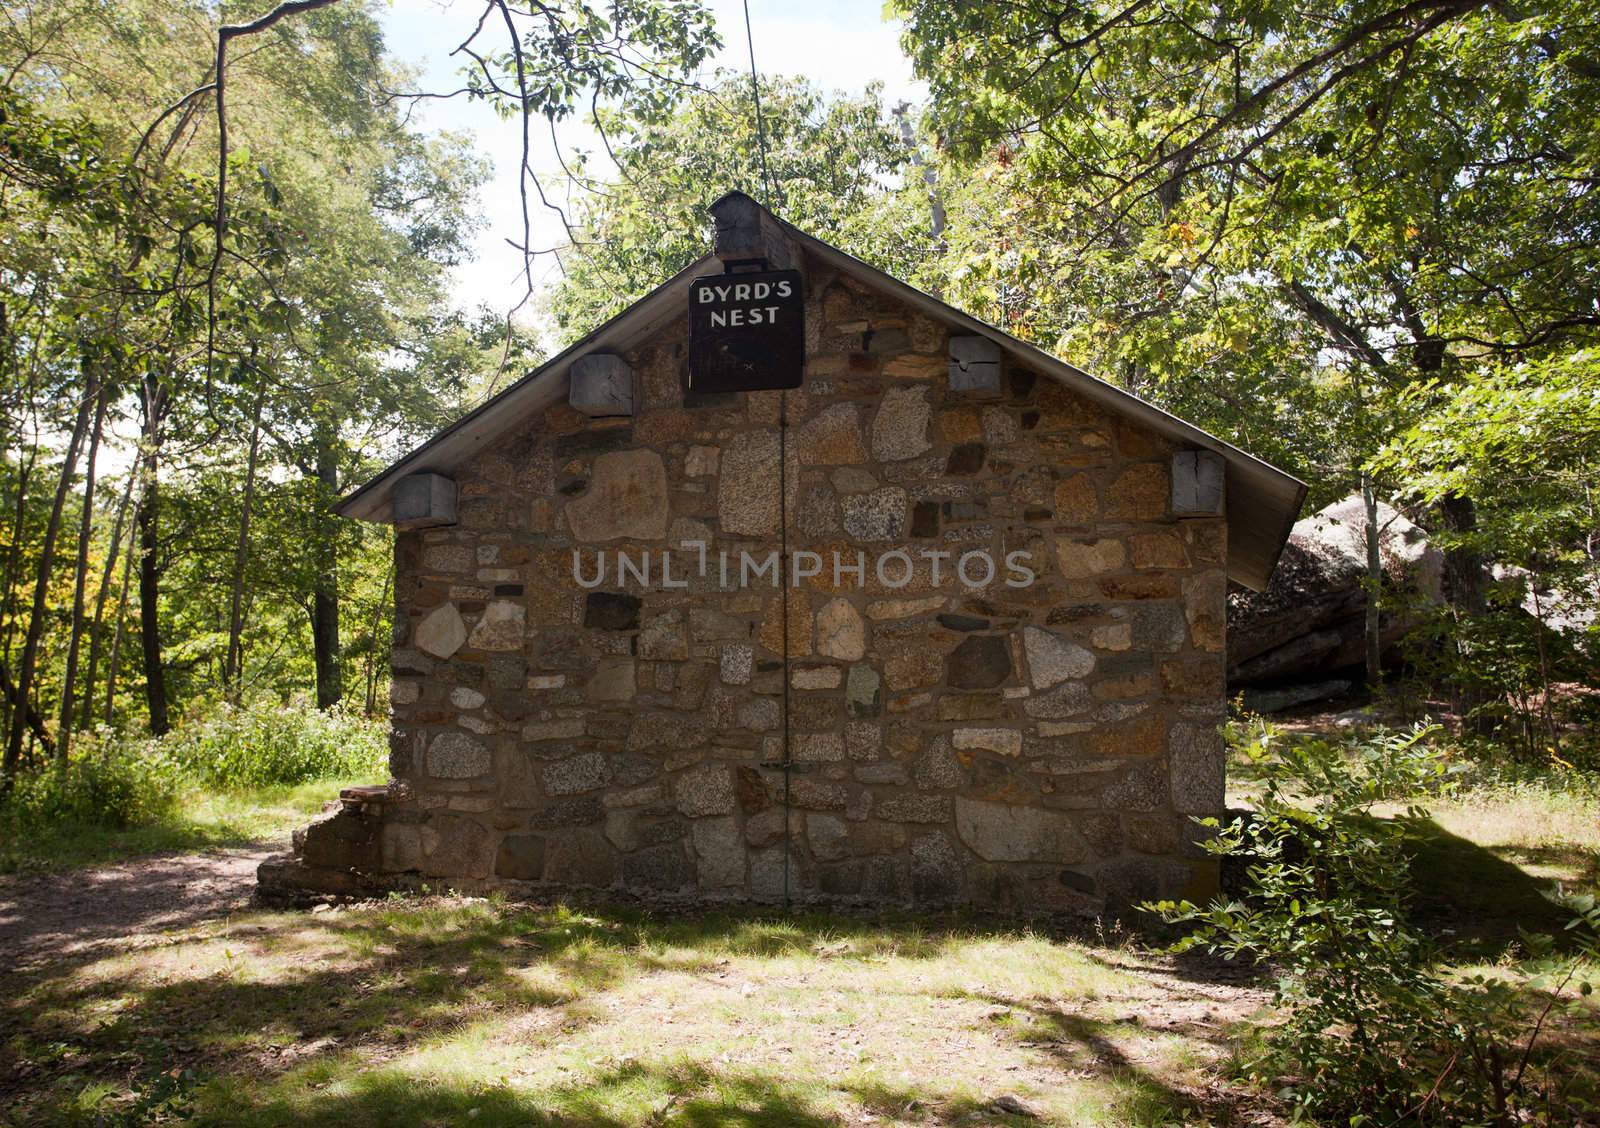 Stone shelter called Byrd's Nest on climb of Old Rag